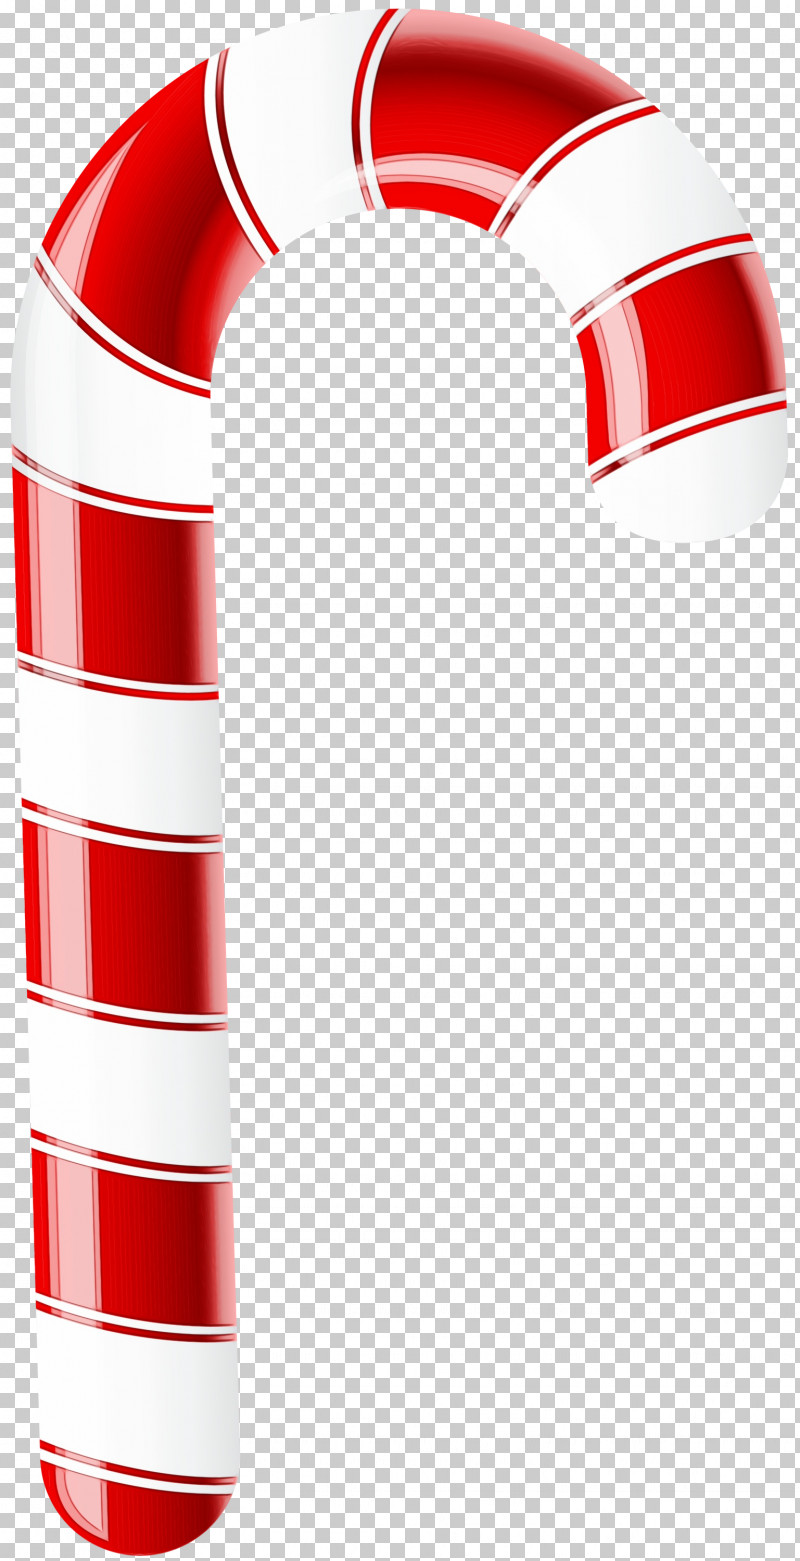 Candy Cane PNG, Clipart, Candy Cane, Christmas, Material Property, Paint, Red Free PNG Download